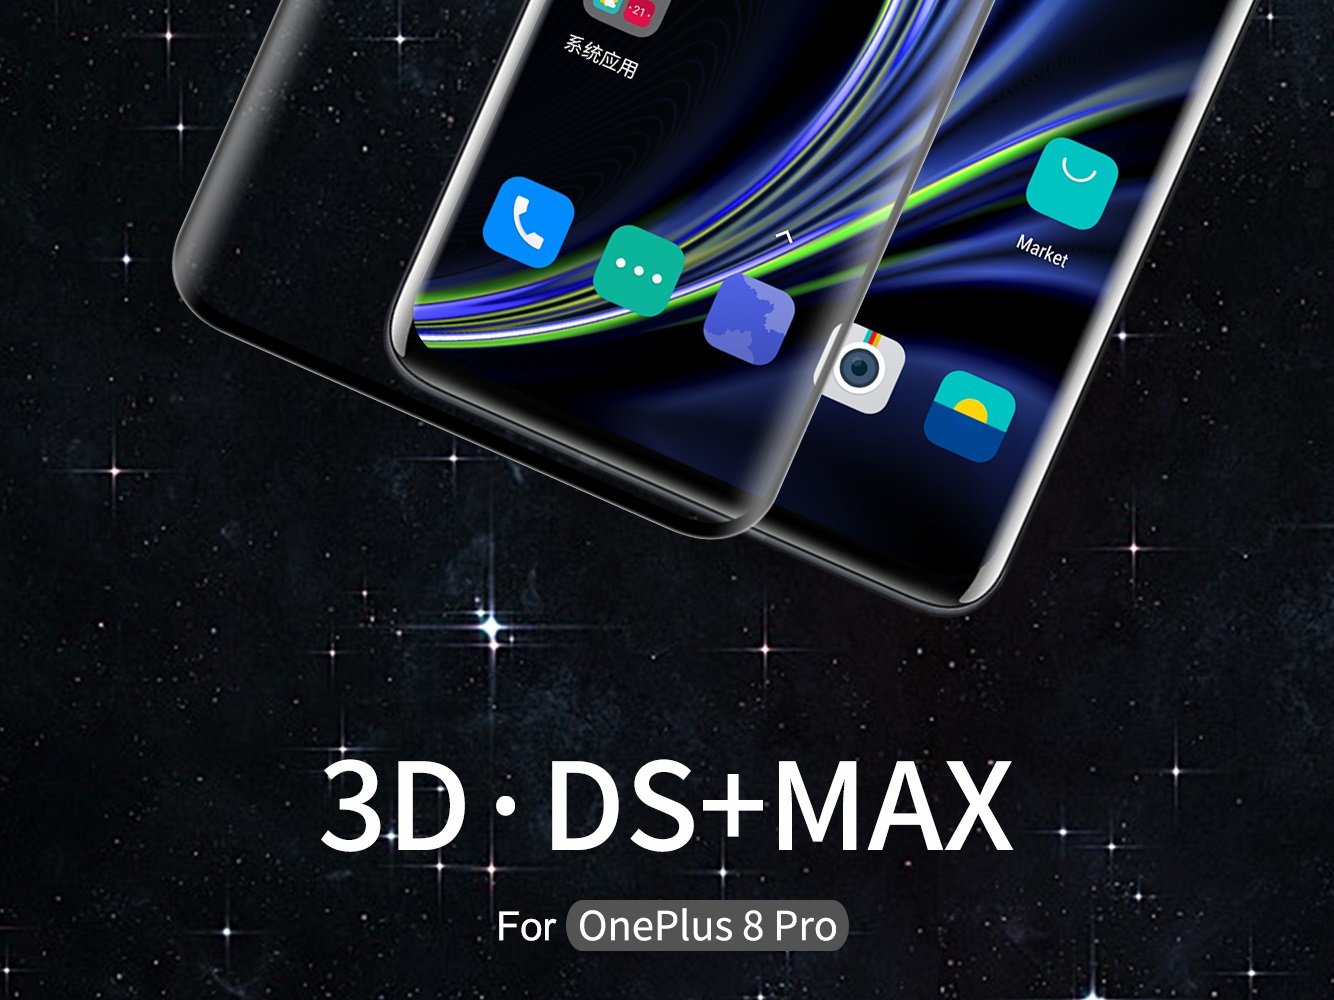 Amazing_3D_DS_Max_Tempered_Glass_Screen_Protector_for_OnePlus_8_Pro-01.jpg